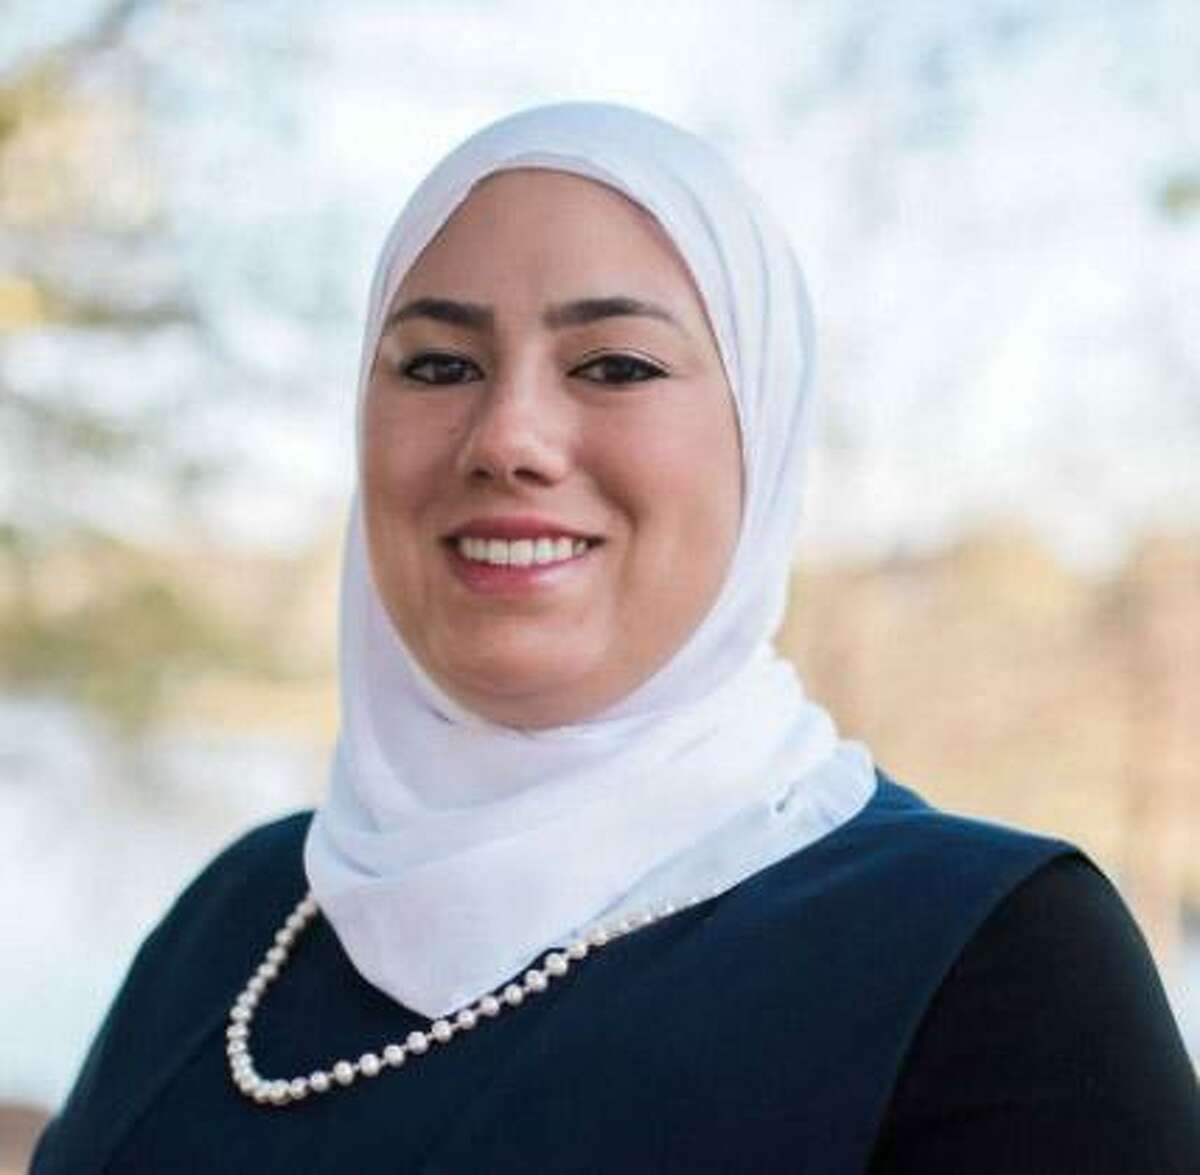 Dalia Kasseb is vying in a June 16, 2018 runoff election for a Pearland City Council seat.